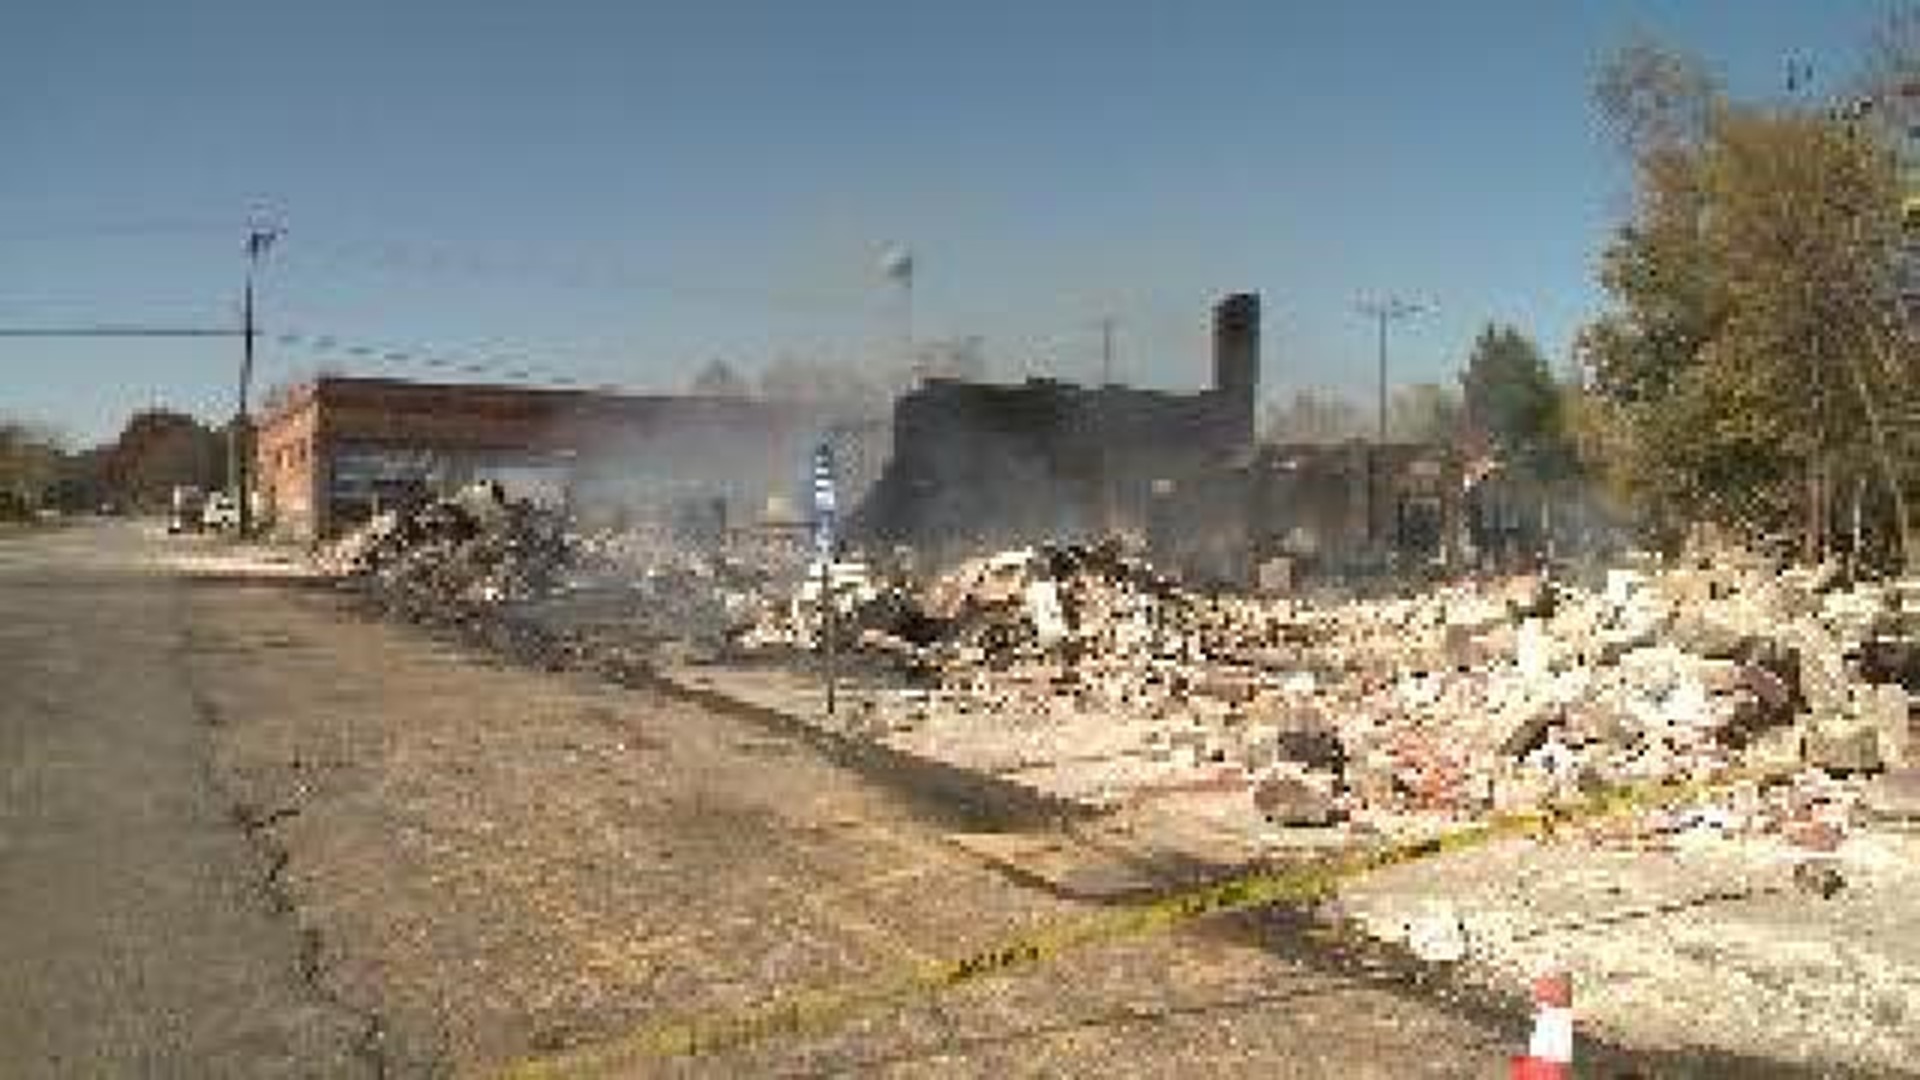 Historic Downtown Buildings Destroyed by Fire